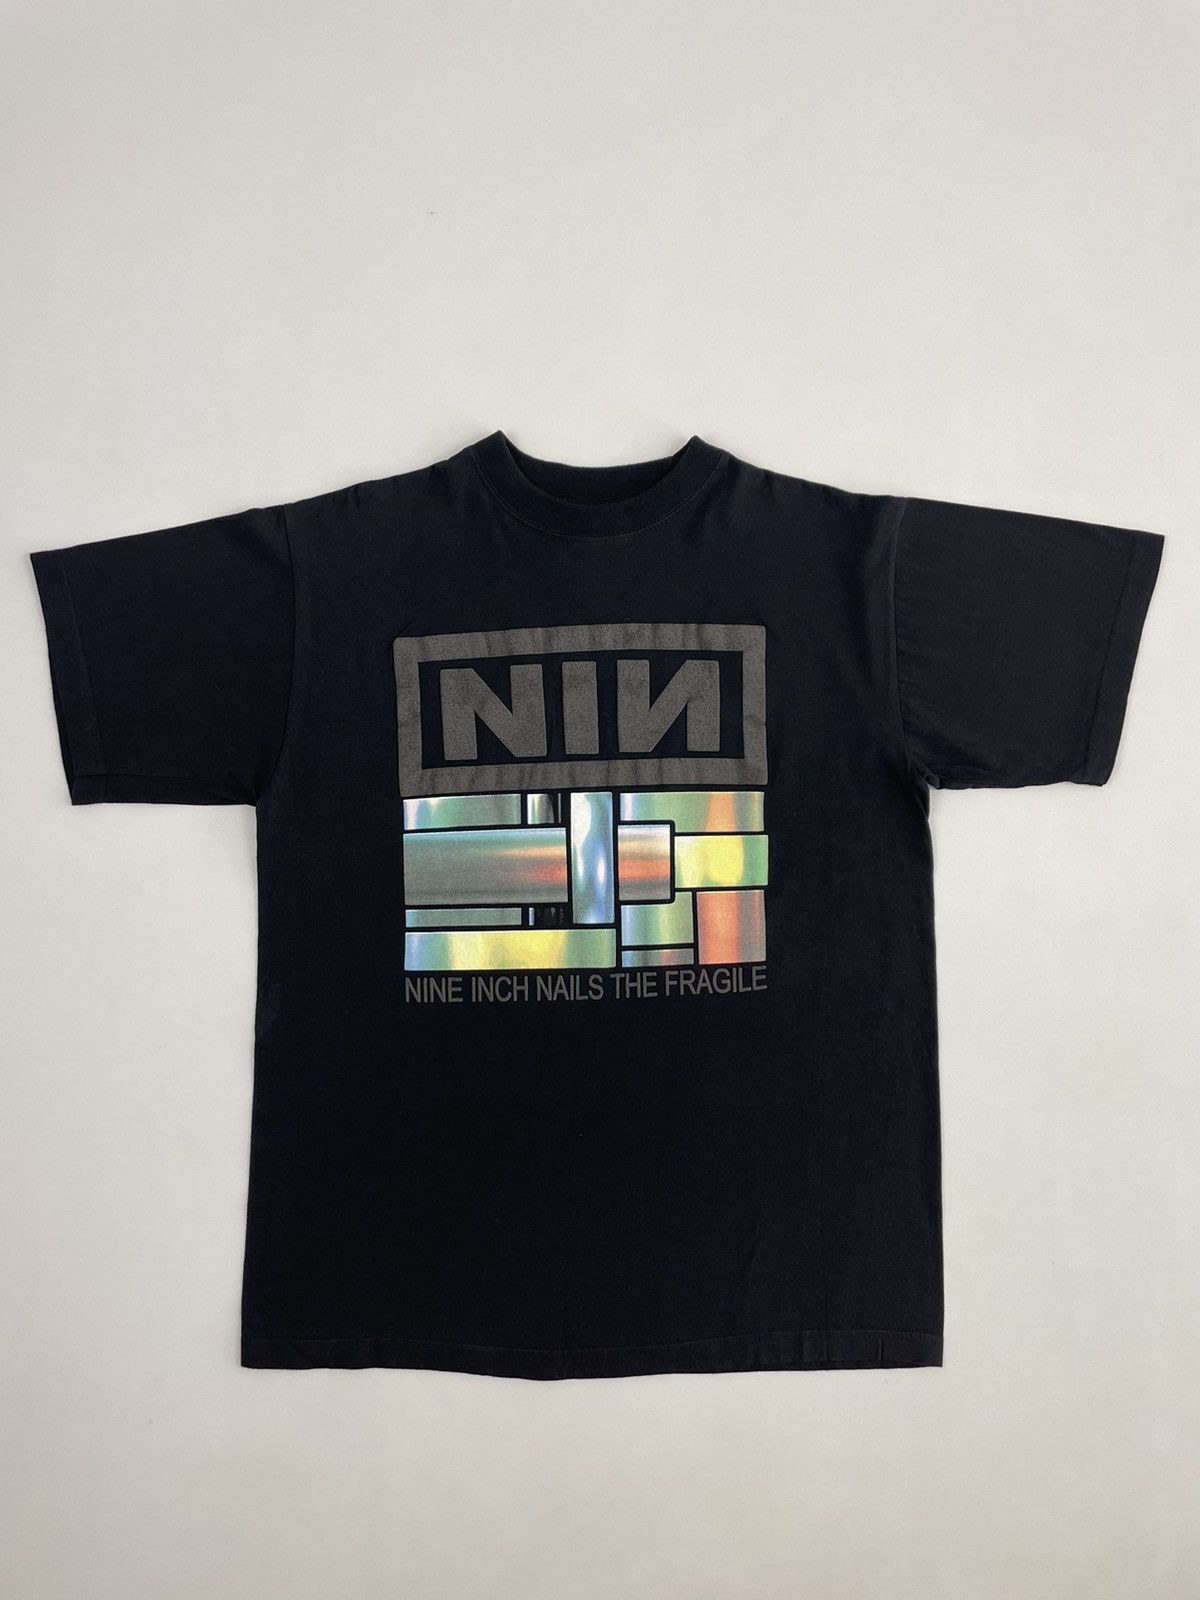 Pre-owned Band Tees X Rock T Shirt 1999 Vintage Nine Inch Nails The Fragile Album Tee In Black